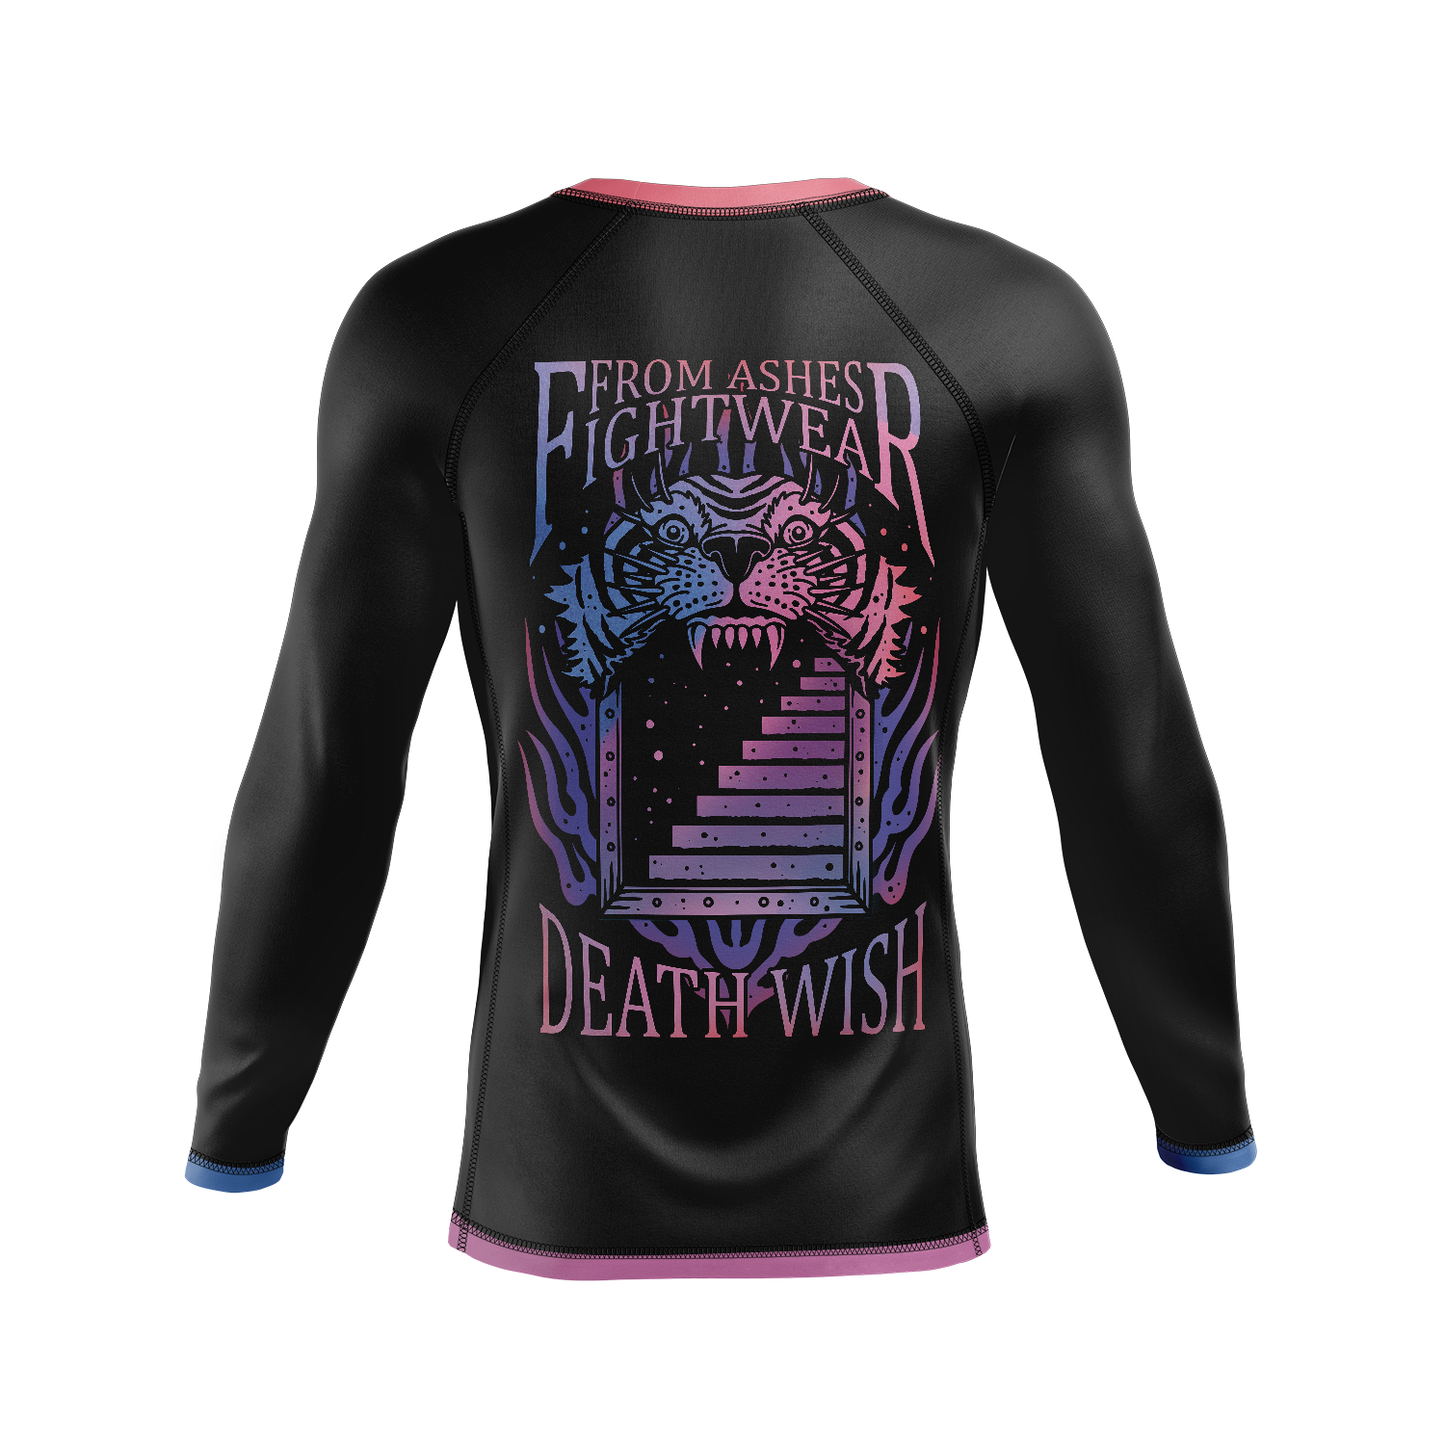 From Ashes Fightwear men's rash guard Death Wish, gradient and black